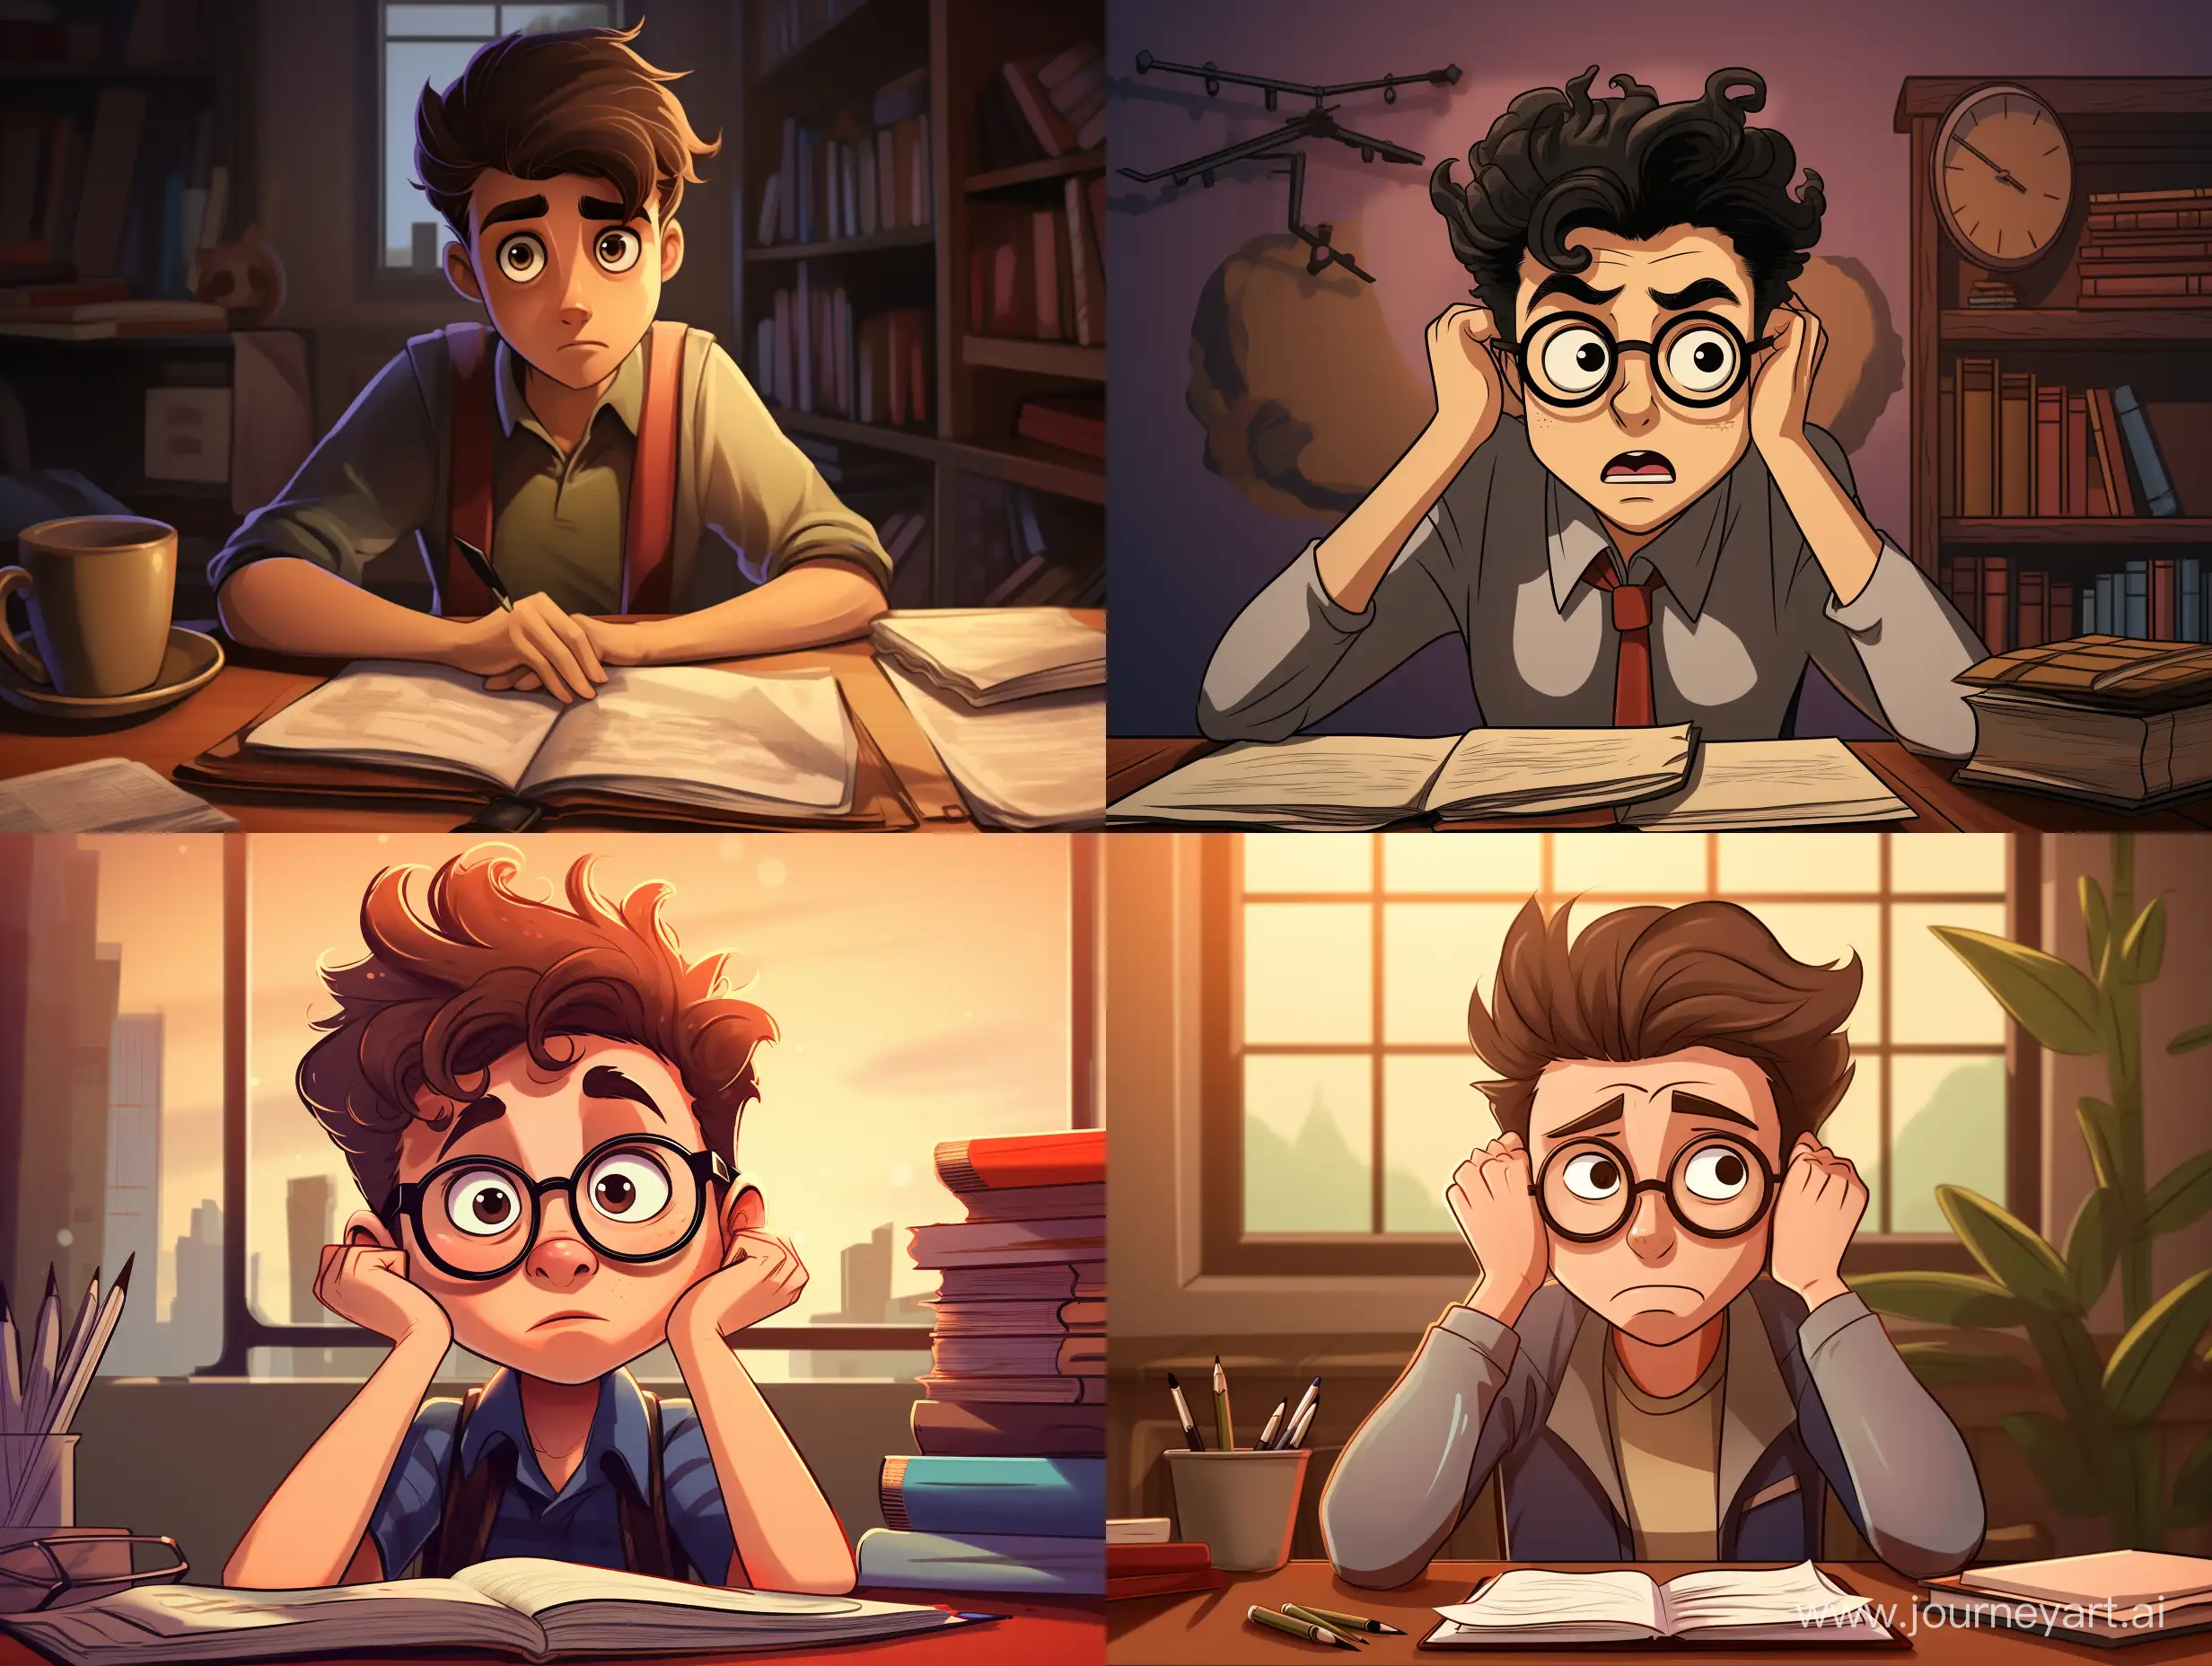 Cartoon-Style-Portrait-of-a-Reluctant-Young-Scholar